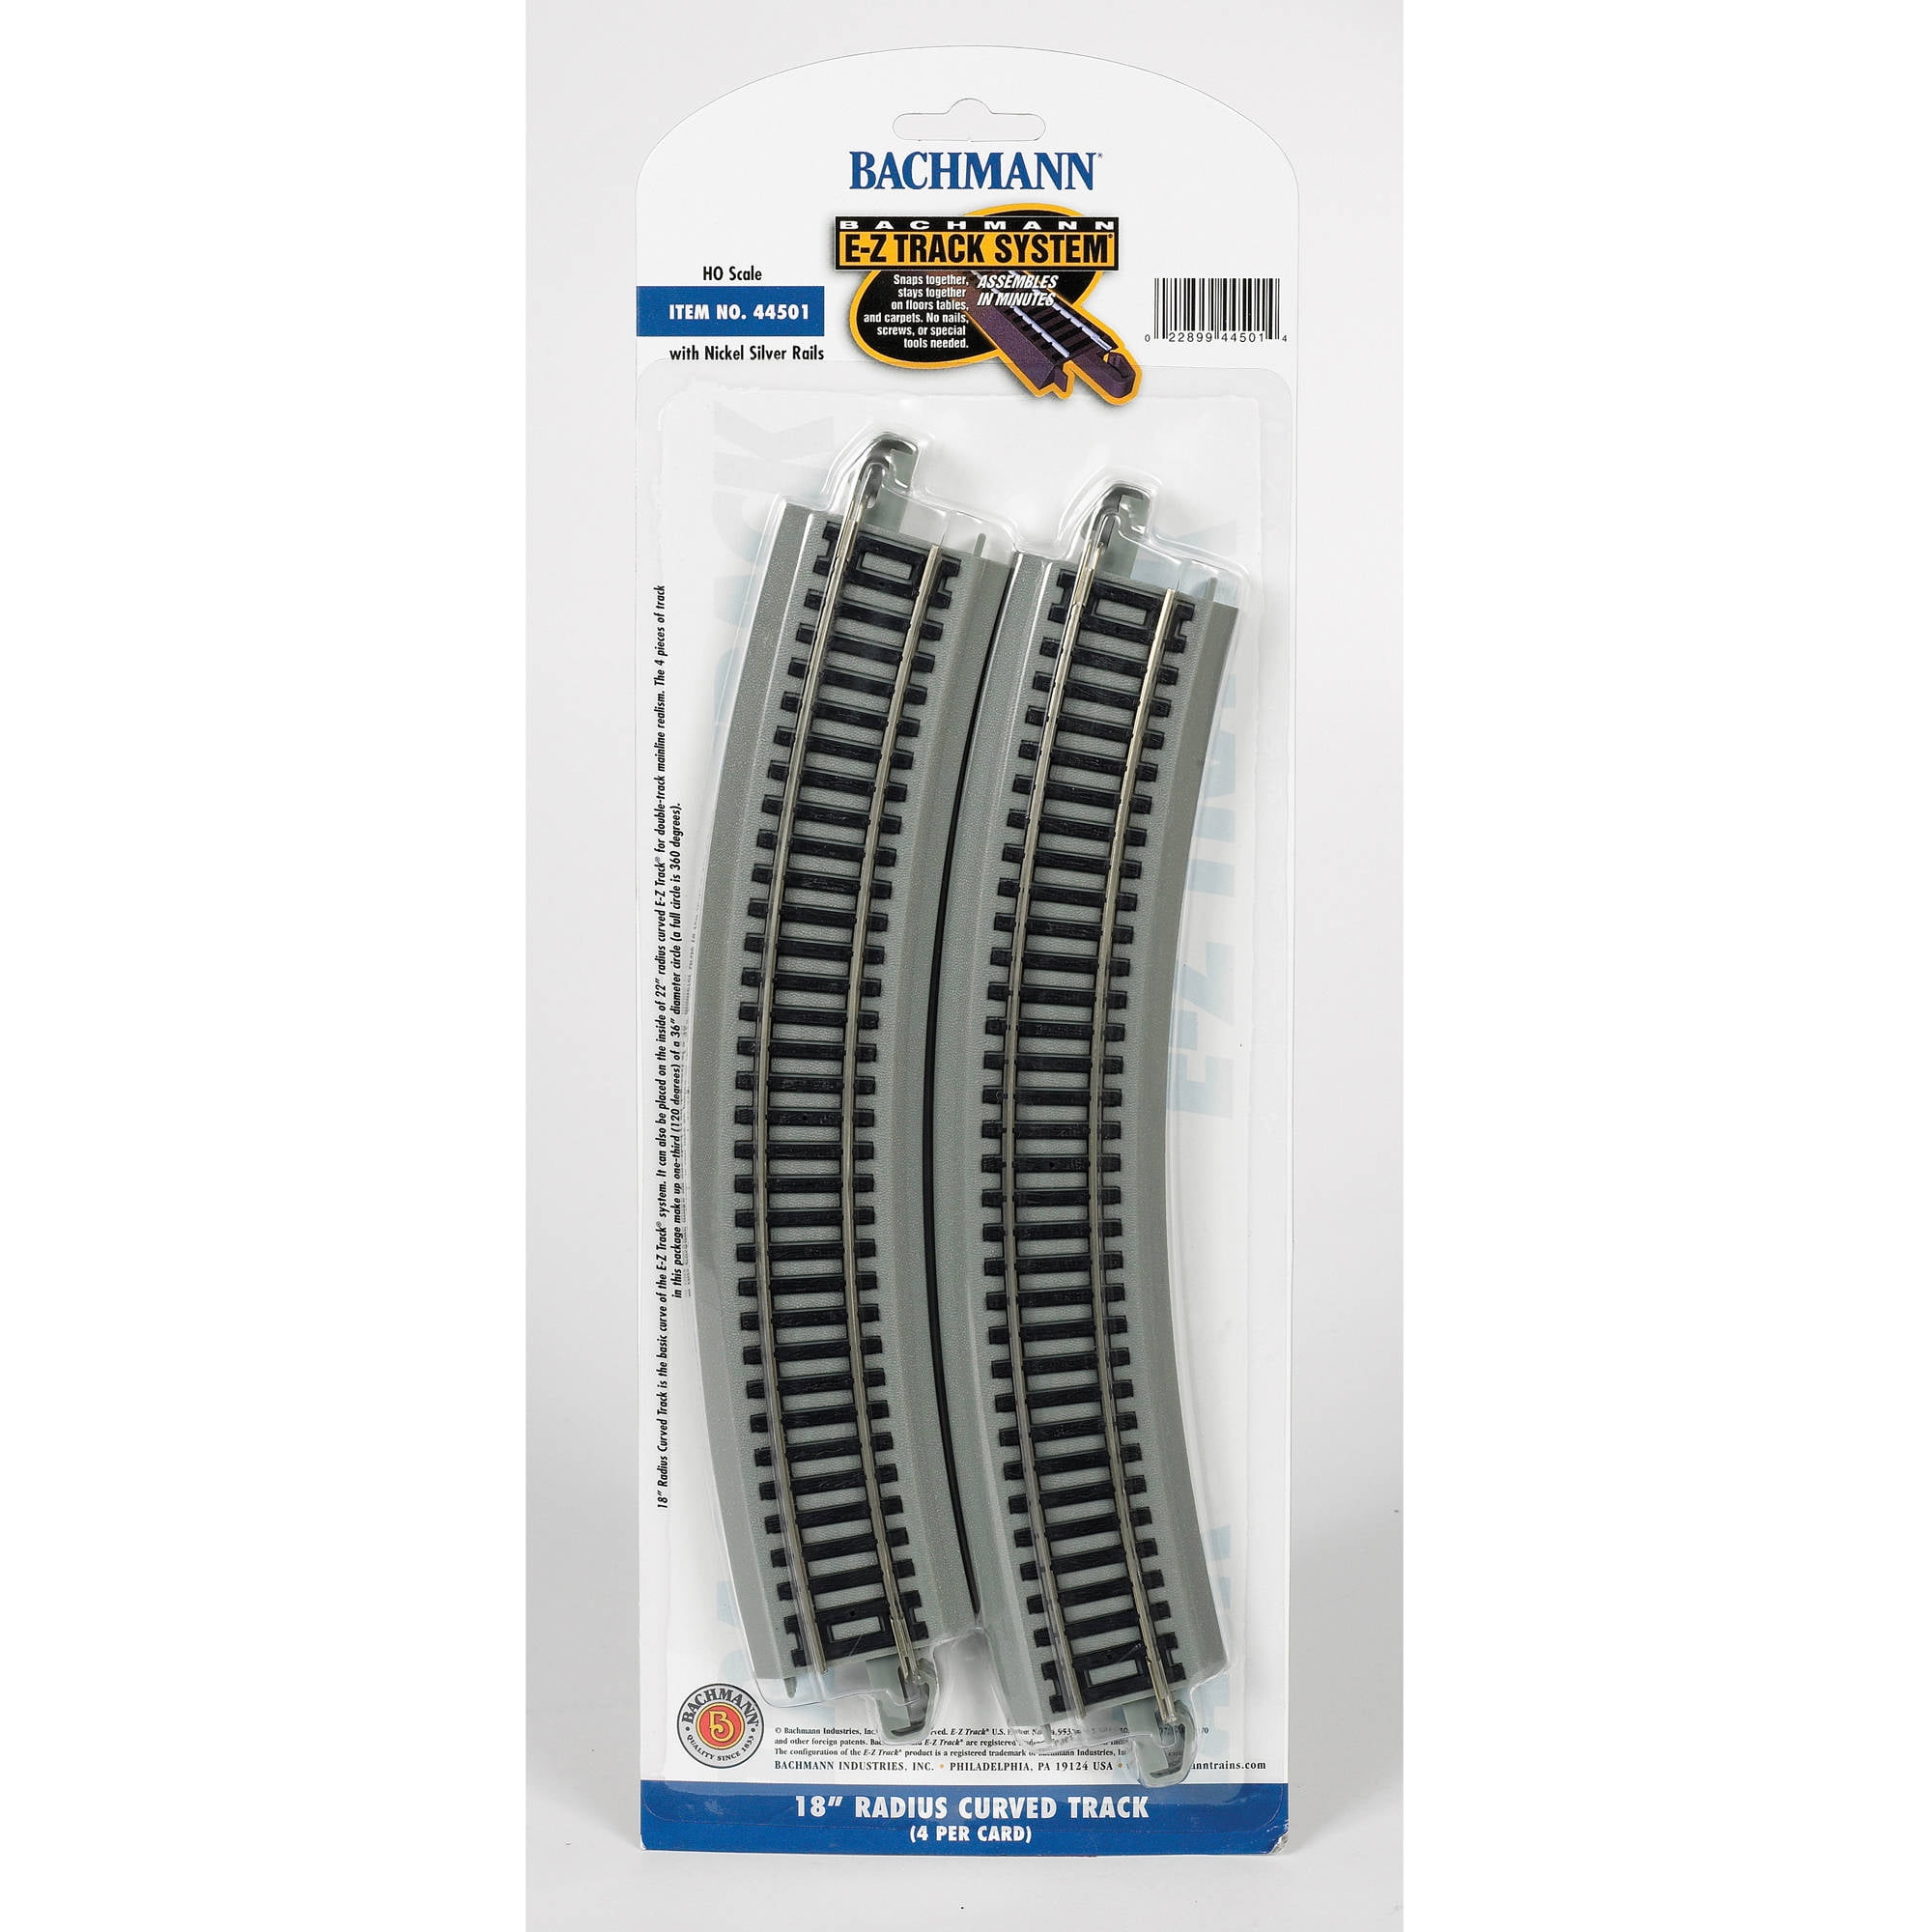 4 Pcs HO Scale 18" Radius Nickel Silver Curve E-z Track Bachmann 44501 for sale online 